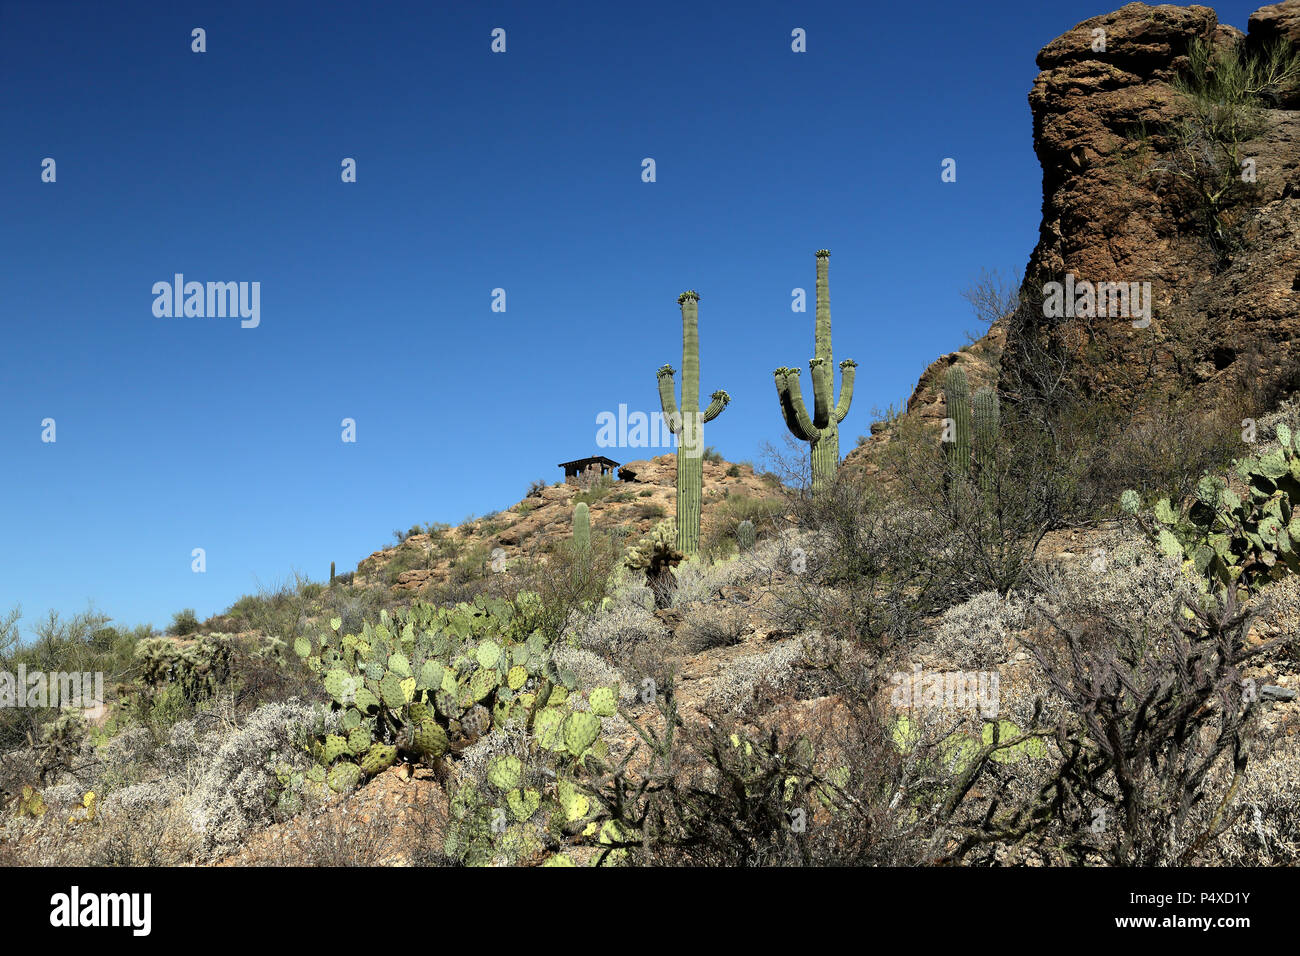 Saguaro cacti and rock formations in the Arizona Sonoran Desert west of Tucson Stock Photo